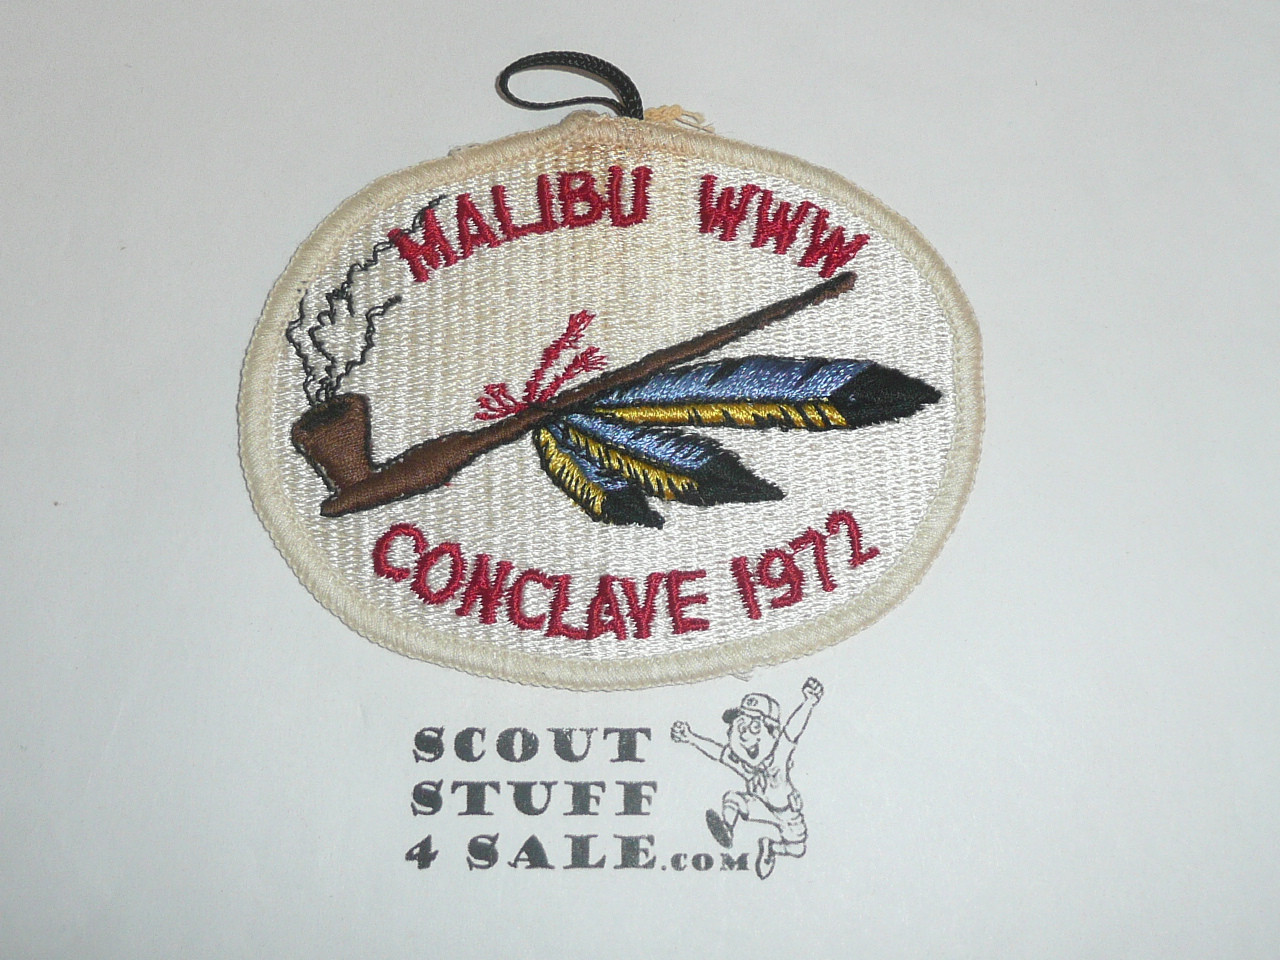 Order of the Arrow Lodge #566 Malibu 1972 Conclave Patch - The First One!